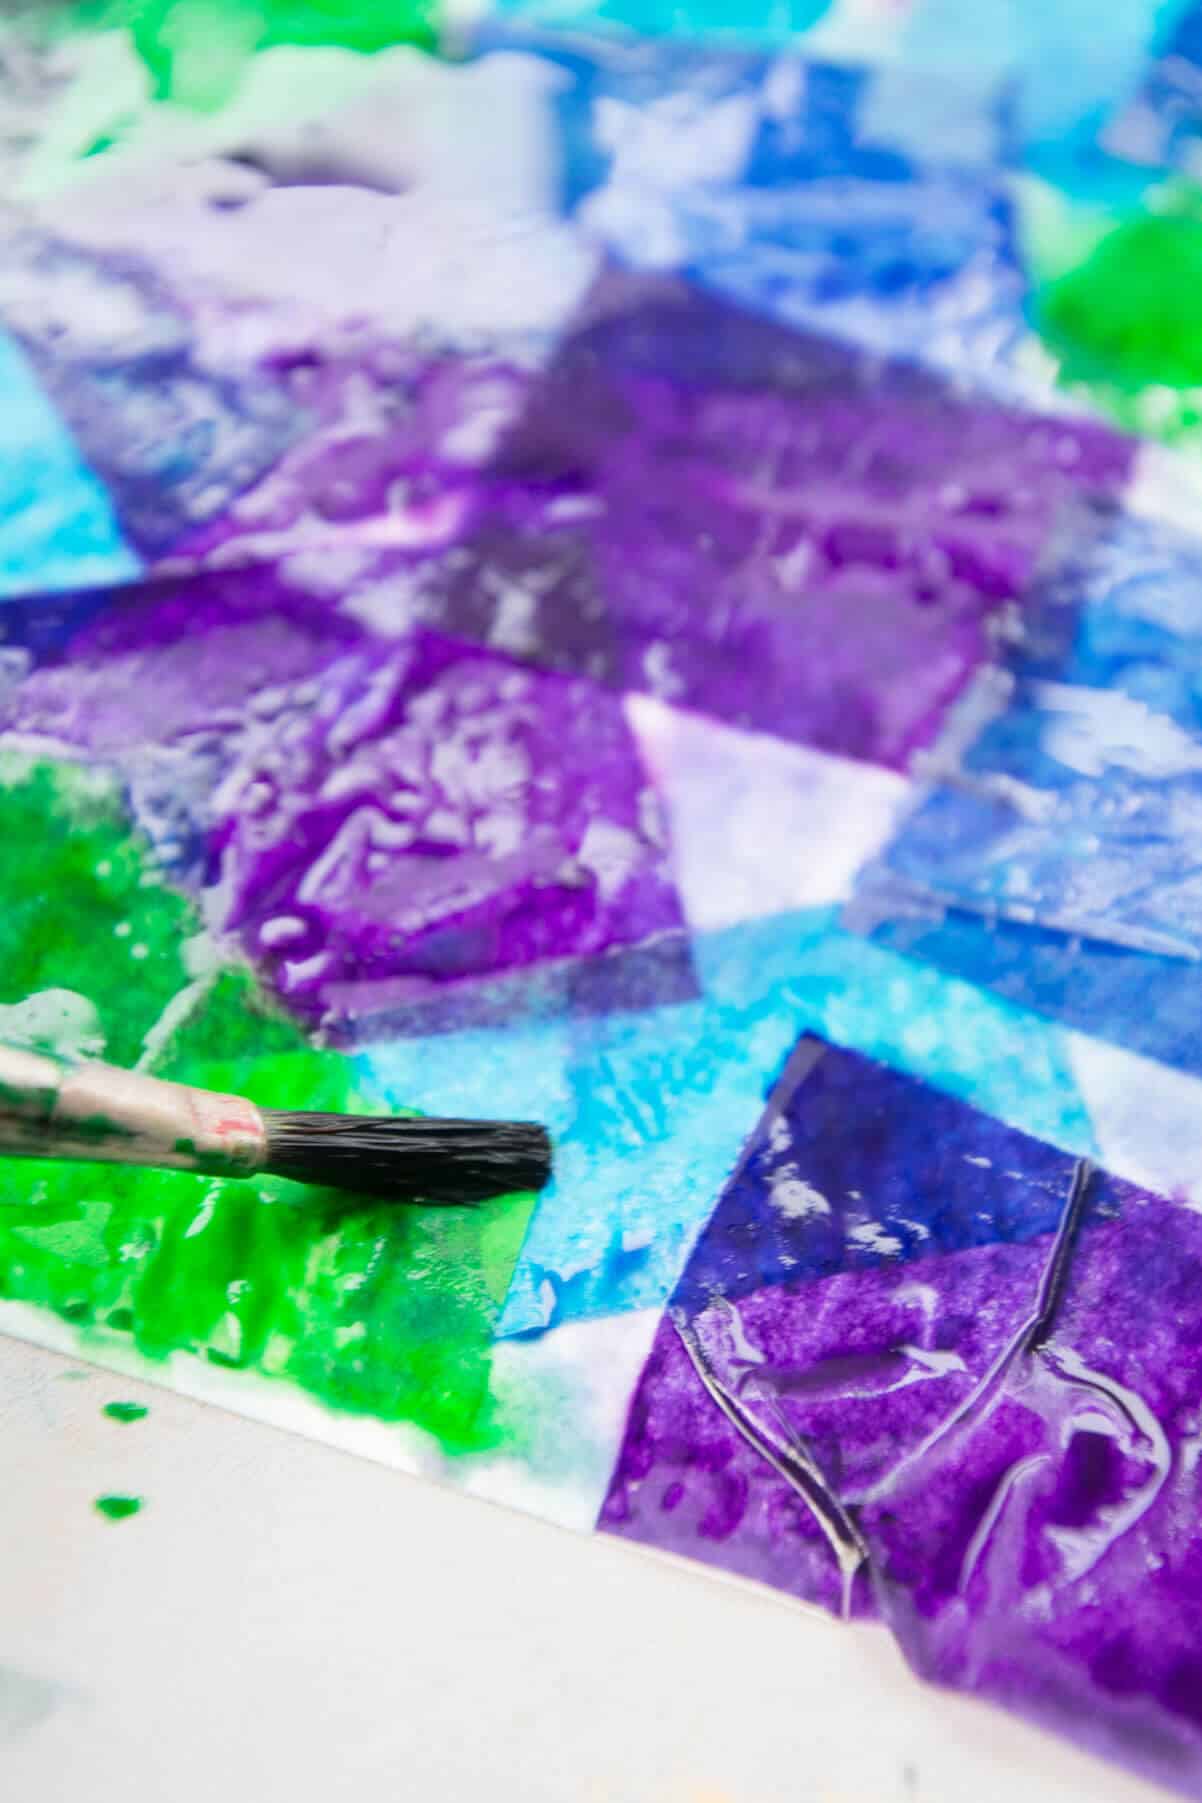 zoomed in view of bleeding tissue paper in green, purple and blue mixing together with brush painting water on.